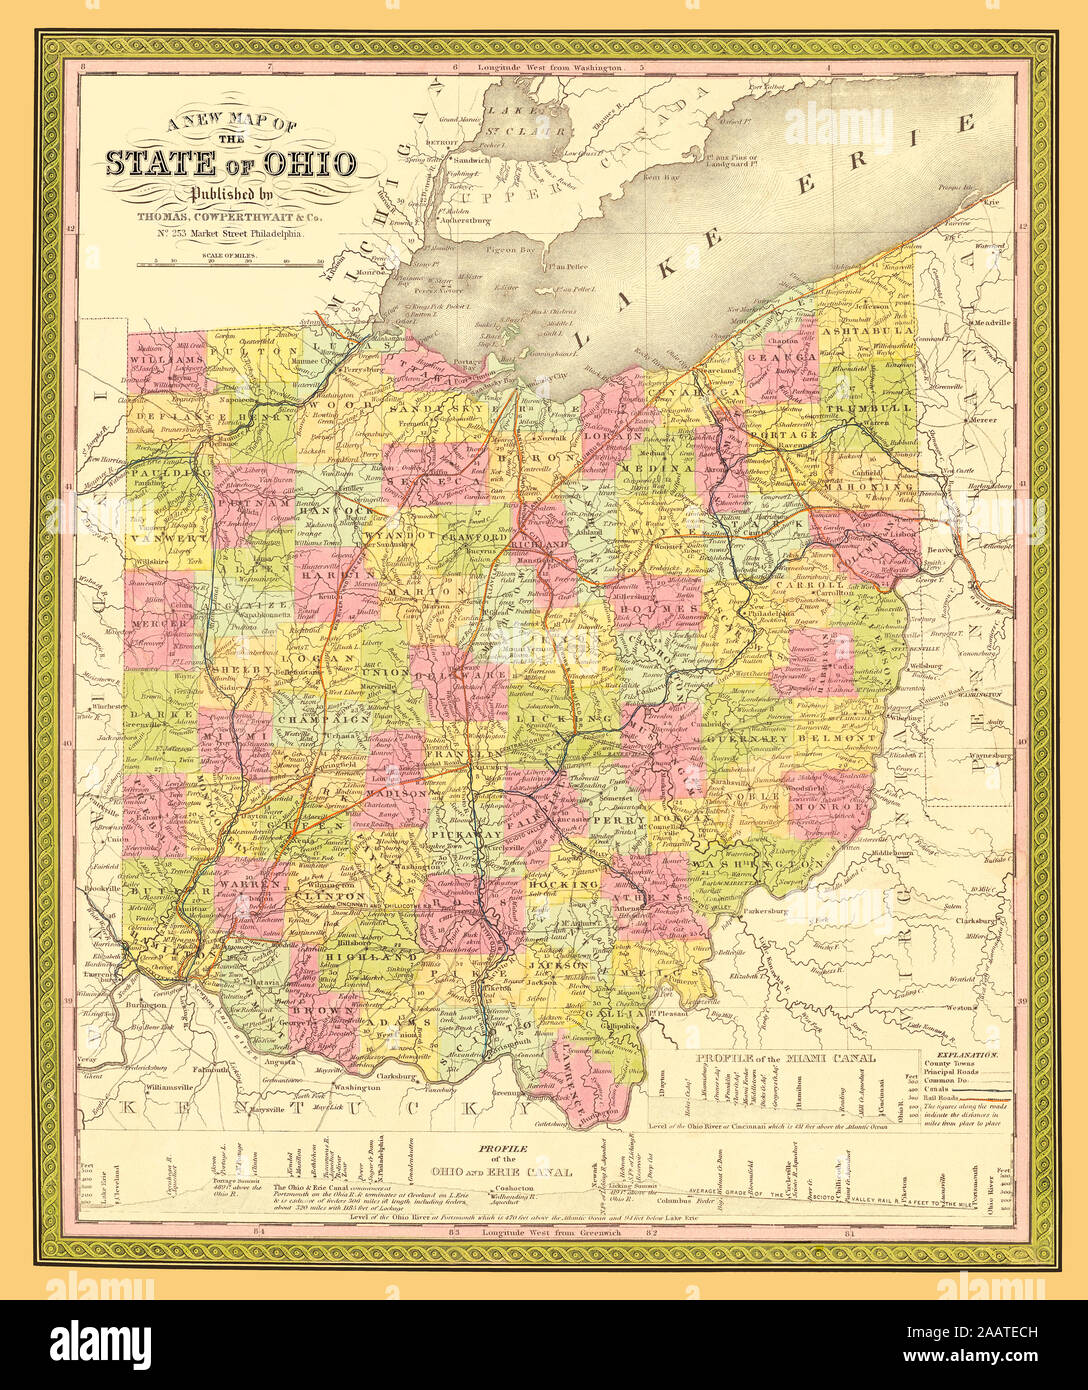 Antique Map Of Ohio 1850 A Restored Reproduction Showing